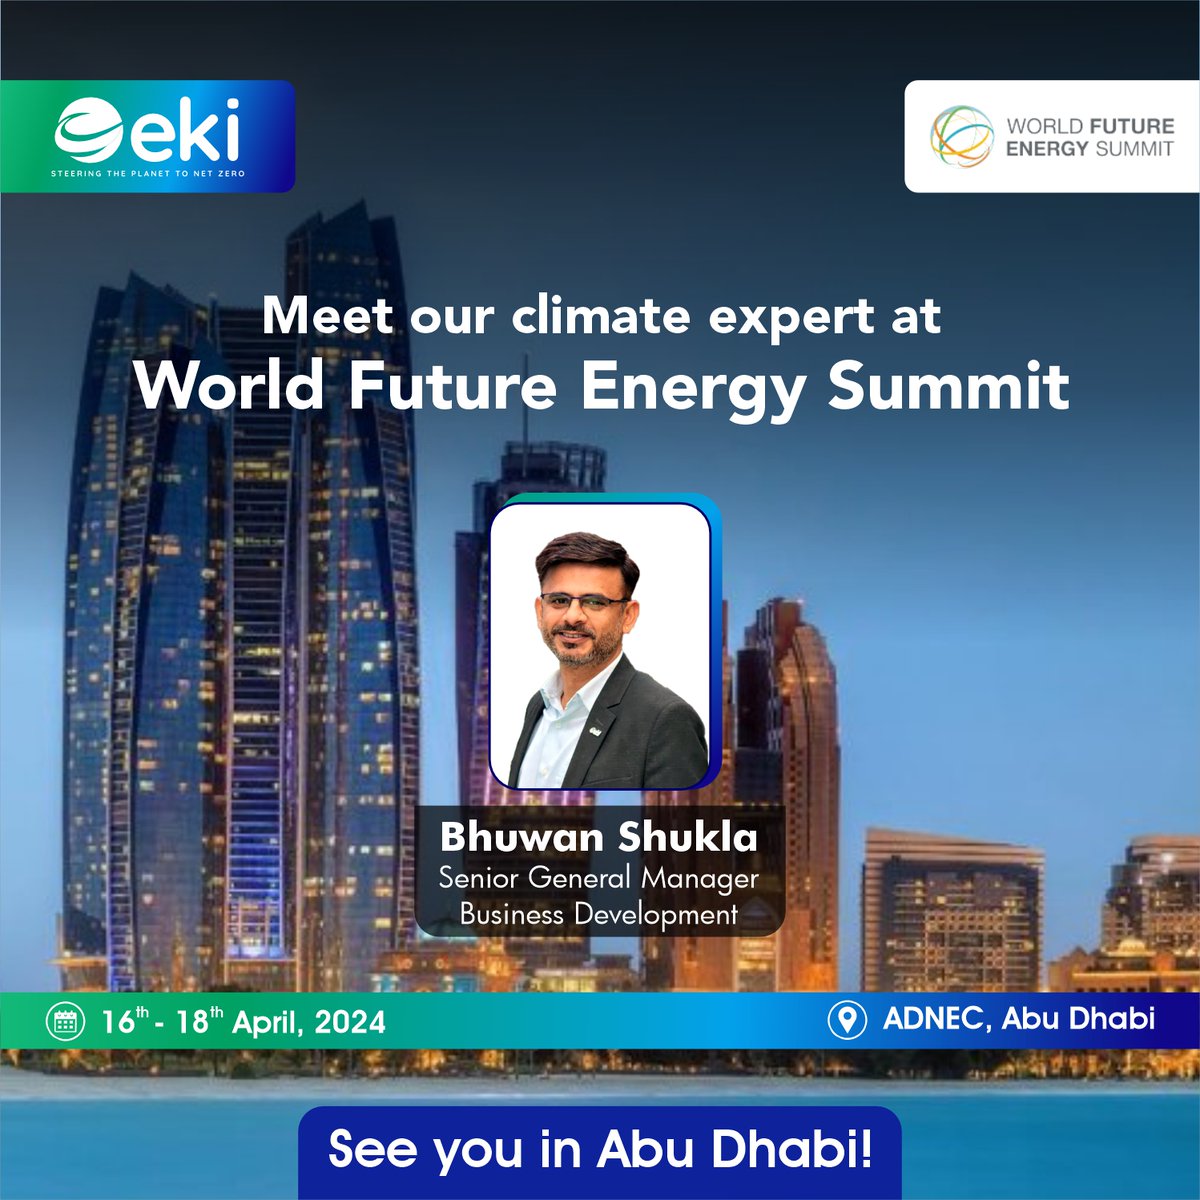 Our climate expert will be there in Abu Dhabi for @World Future Energy Summit on 16-18 April. Let's connect to explore business opportunities and take a step ahead towards climate action.

#EKIEnergyServices #EKIEnergy #EKI #Sustainability